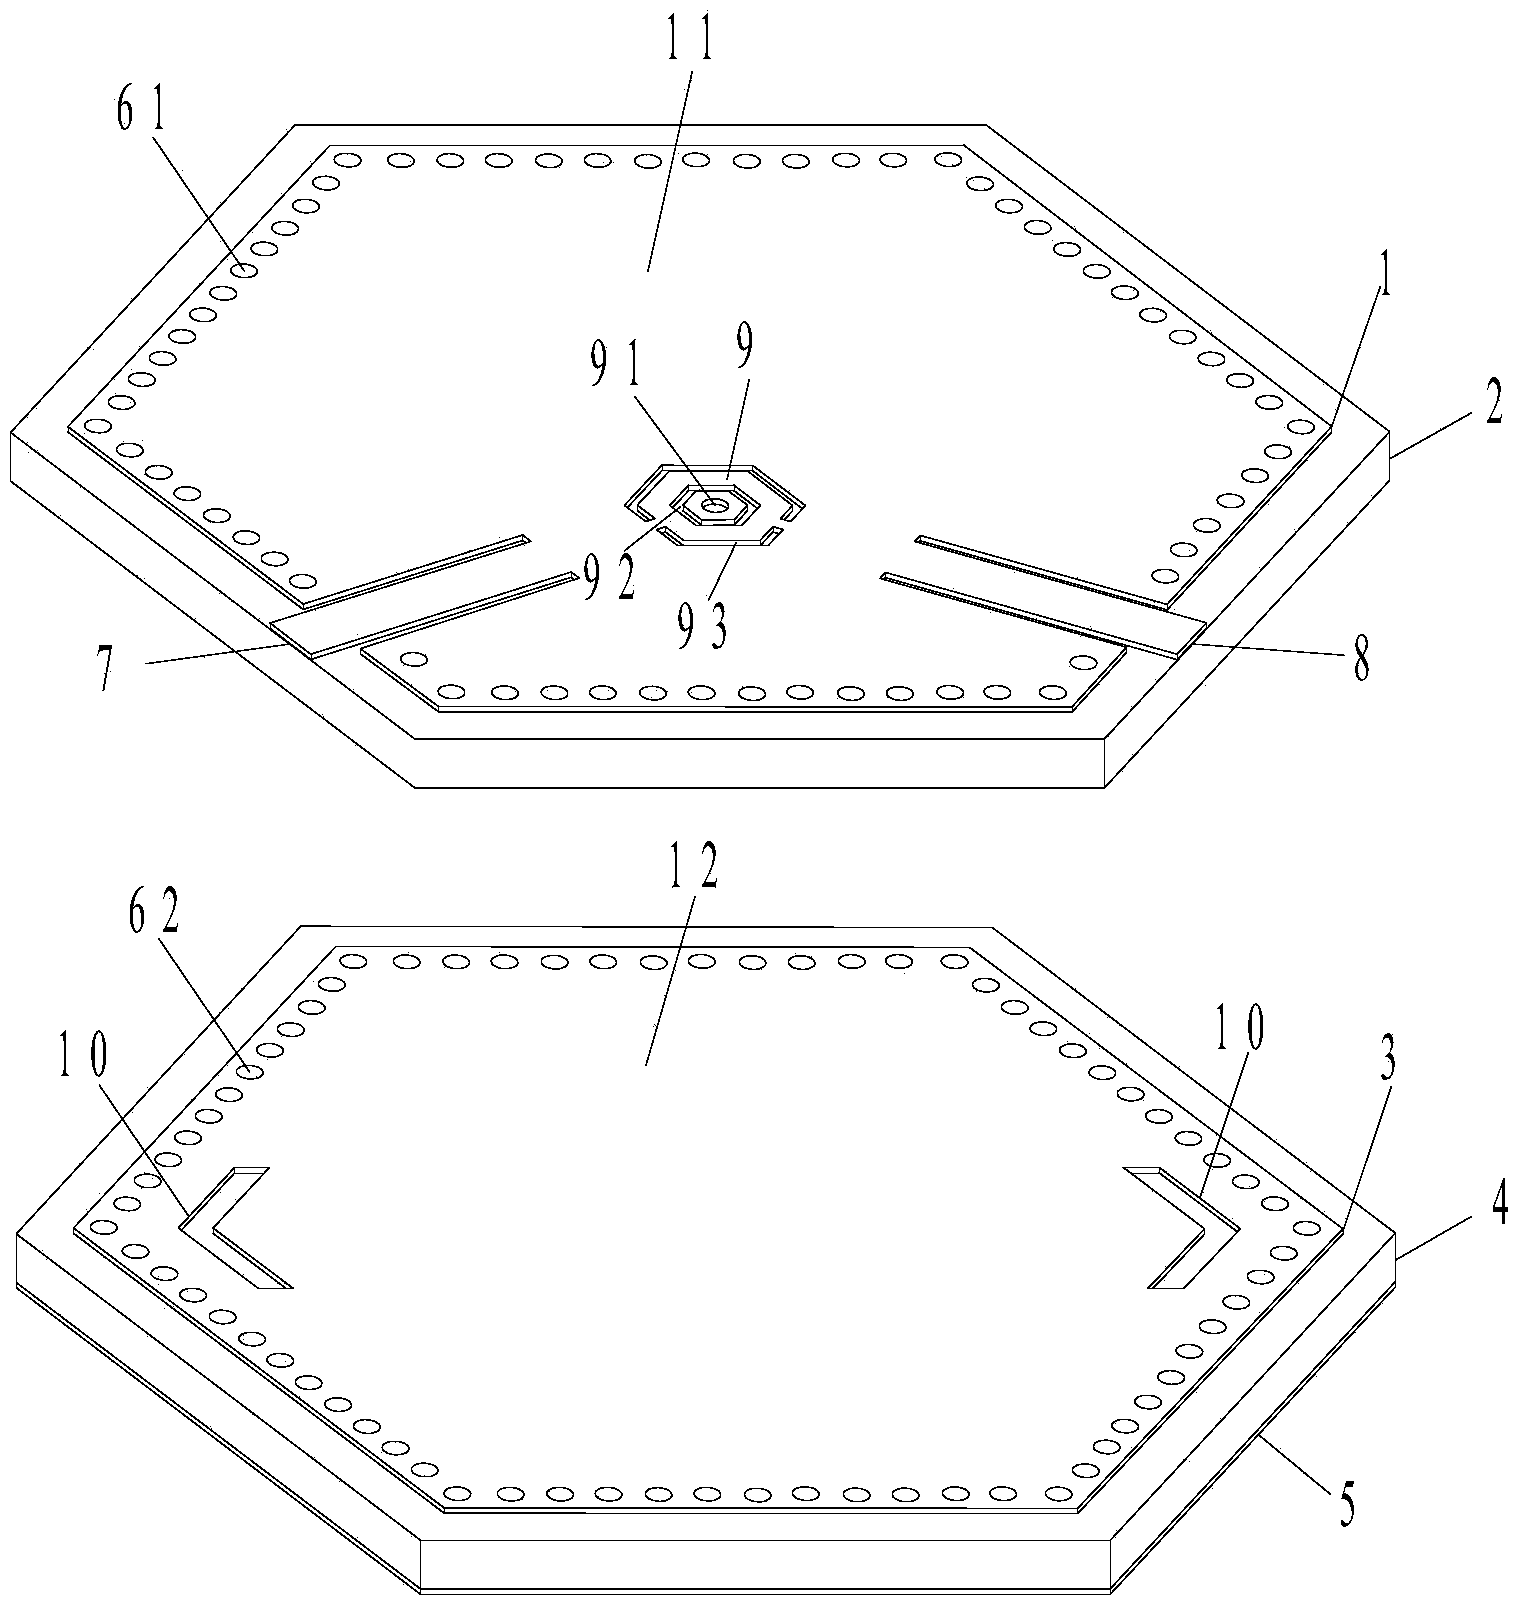 Multi-layer hybrid-mode hexagonal substrate integrated waveguide filter